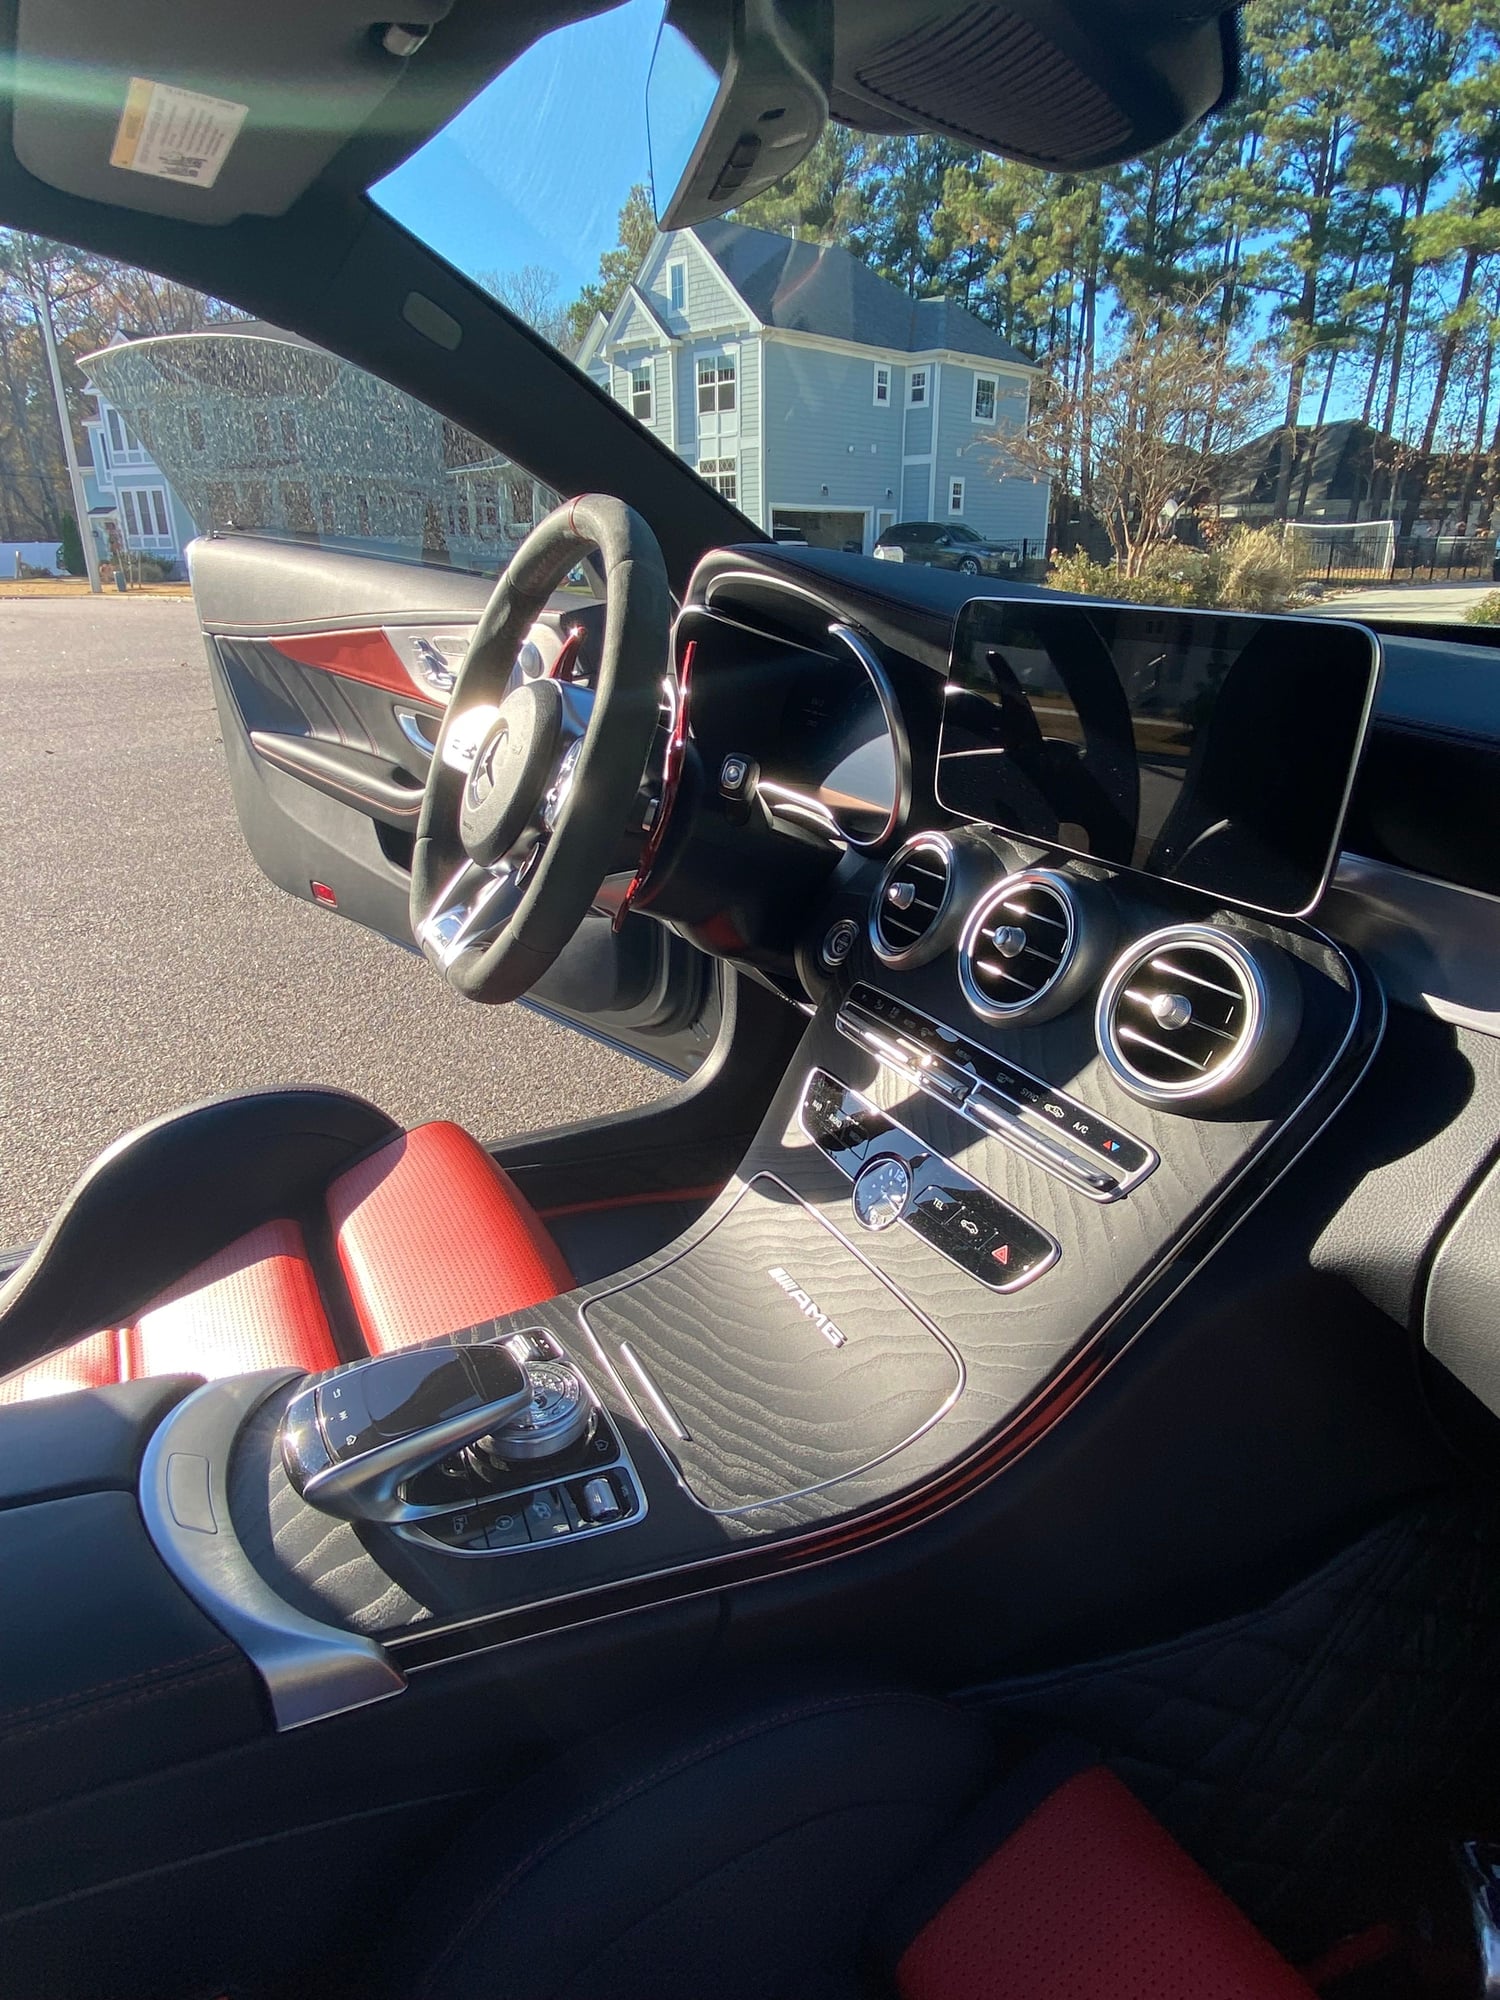 2019 Mercedes-Benz C63 AMG S - 2019 C63s Coupe designo Graphite Grey Magno - Used - VIN WDDWJ8HB8KF905328 - 27,500 Miles - 8 cyl - 2WD - Automatic - Coupe - Other - Virginia Beach, VA 23456, United States